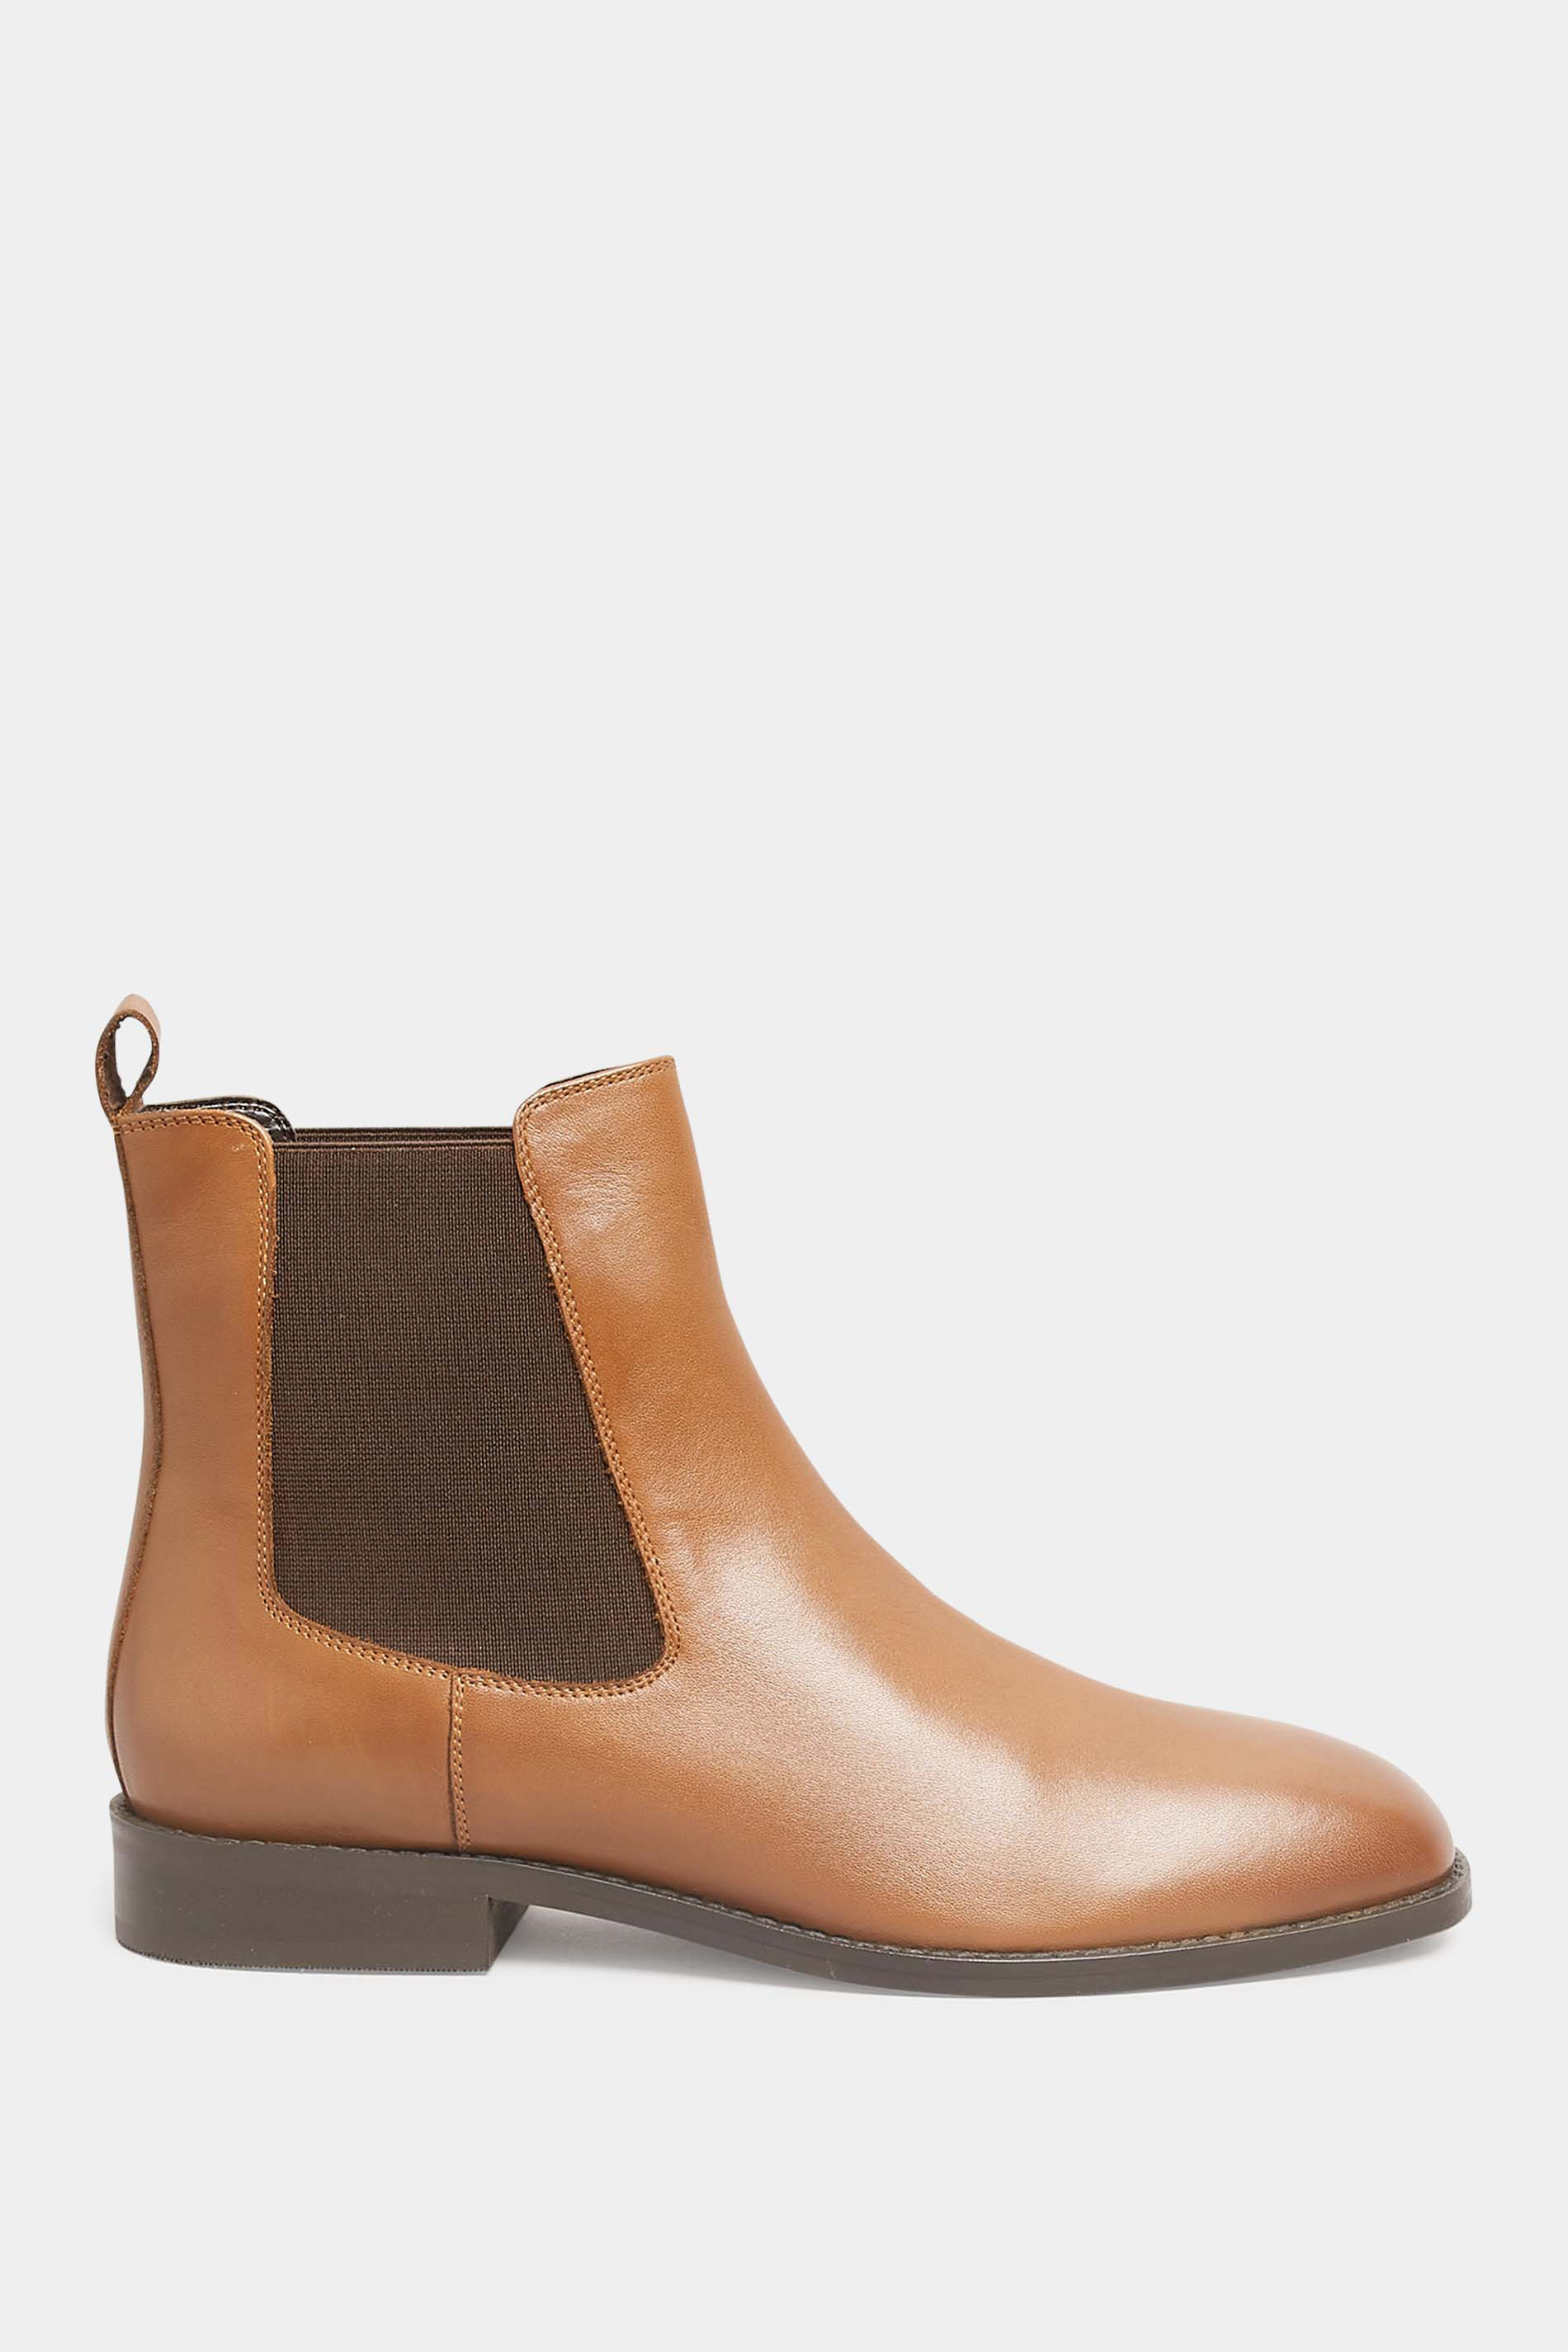 LTS Tan Brown Leather Chelsea Boots In Standard Fit | Long Tall Sally 3